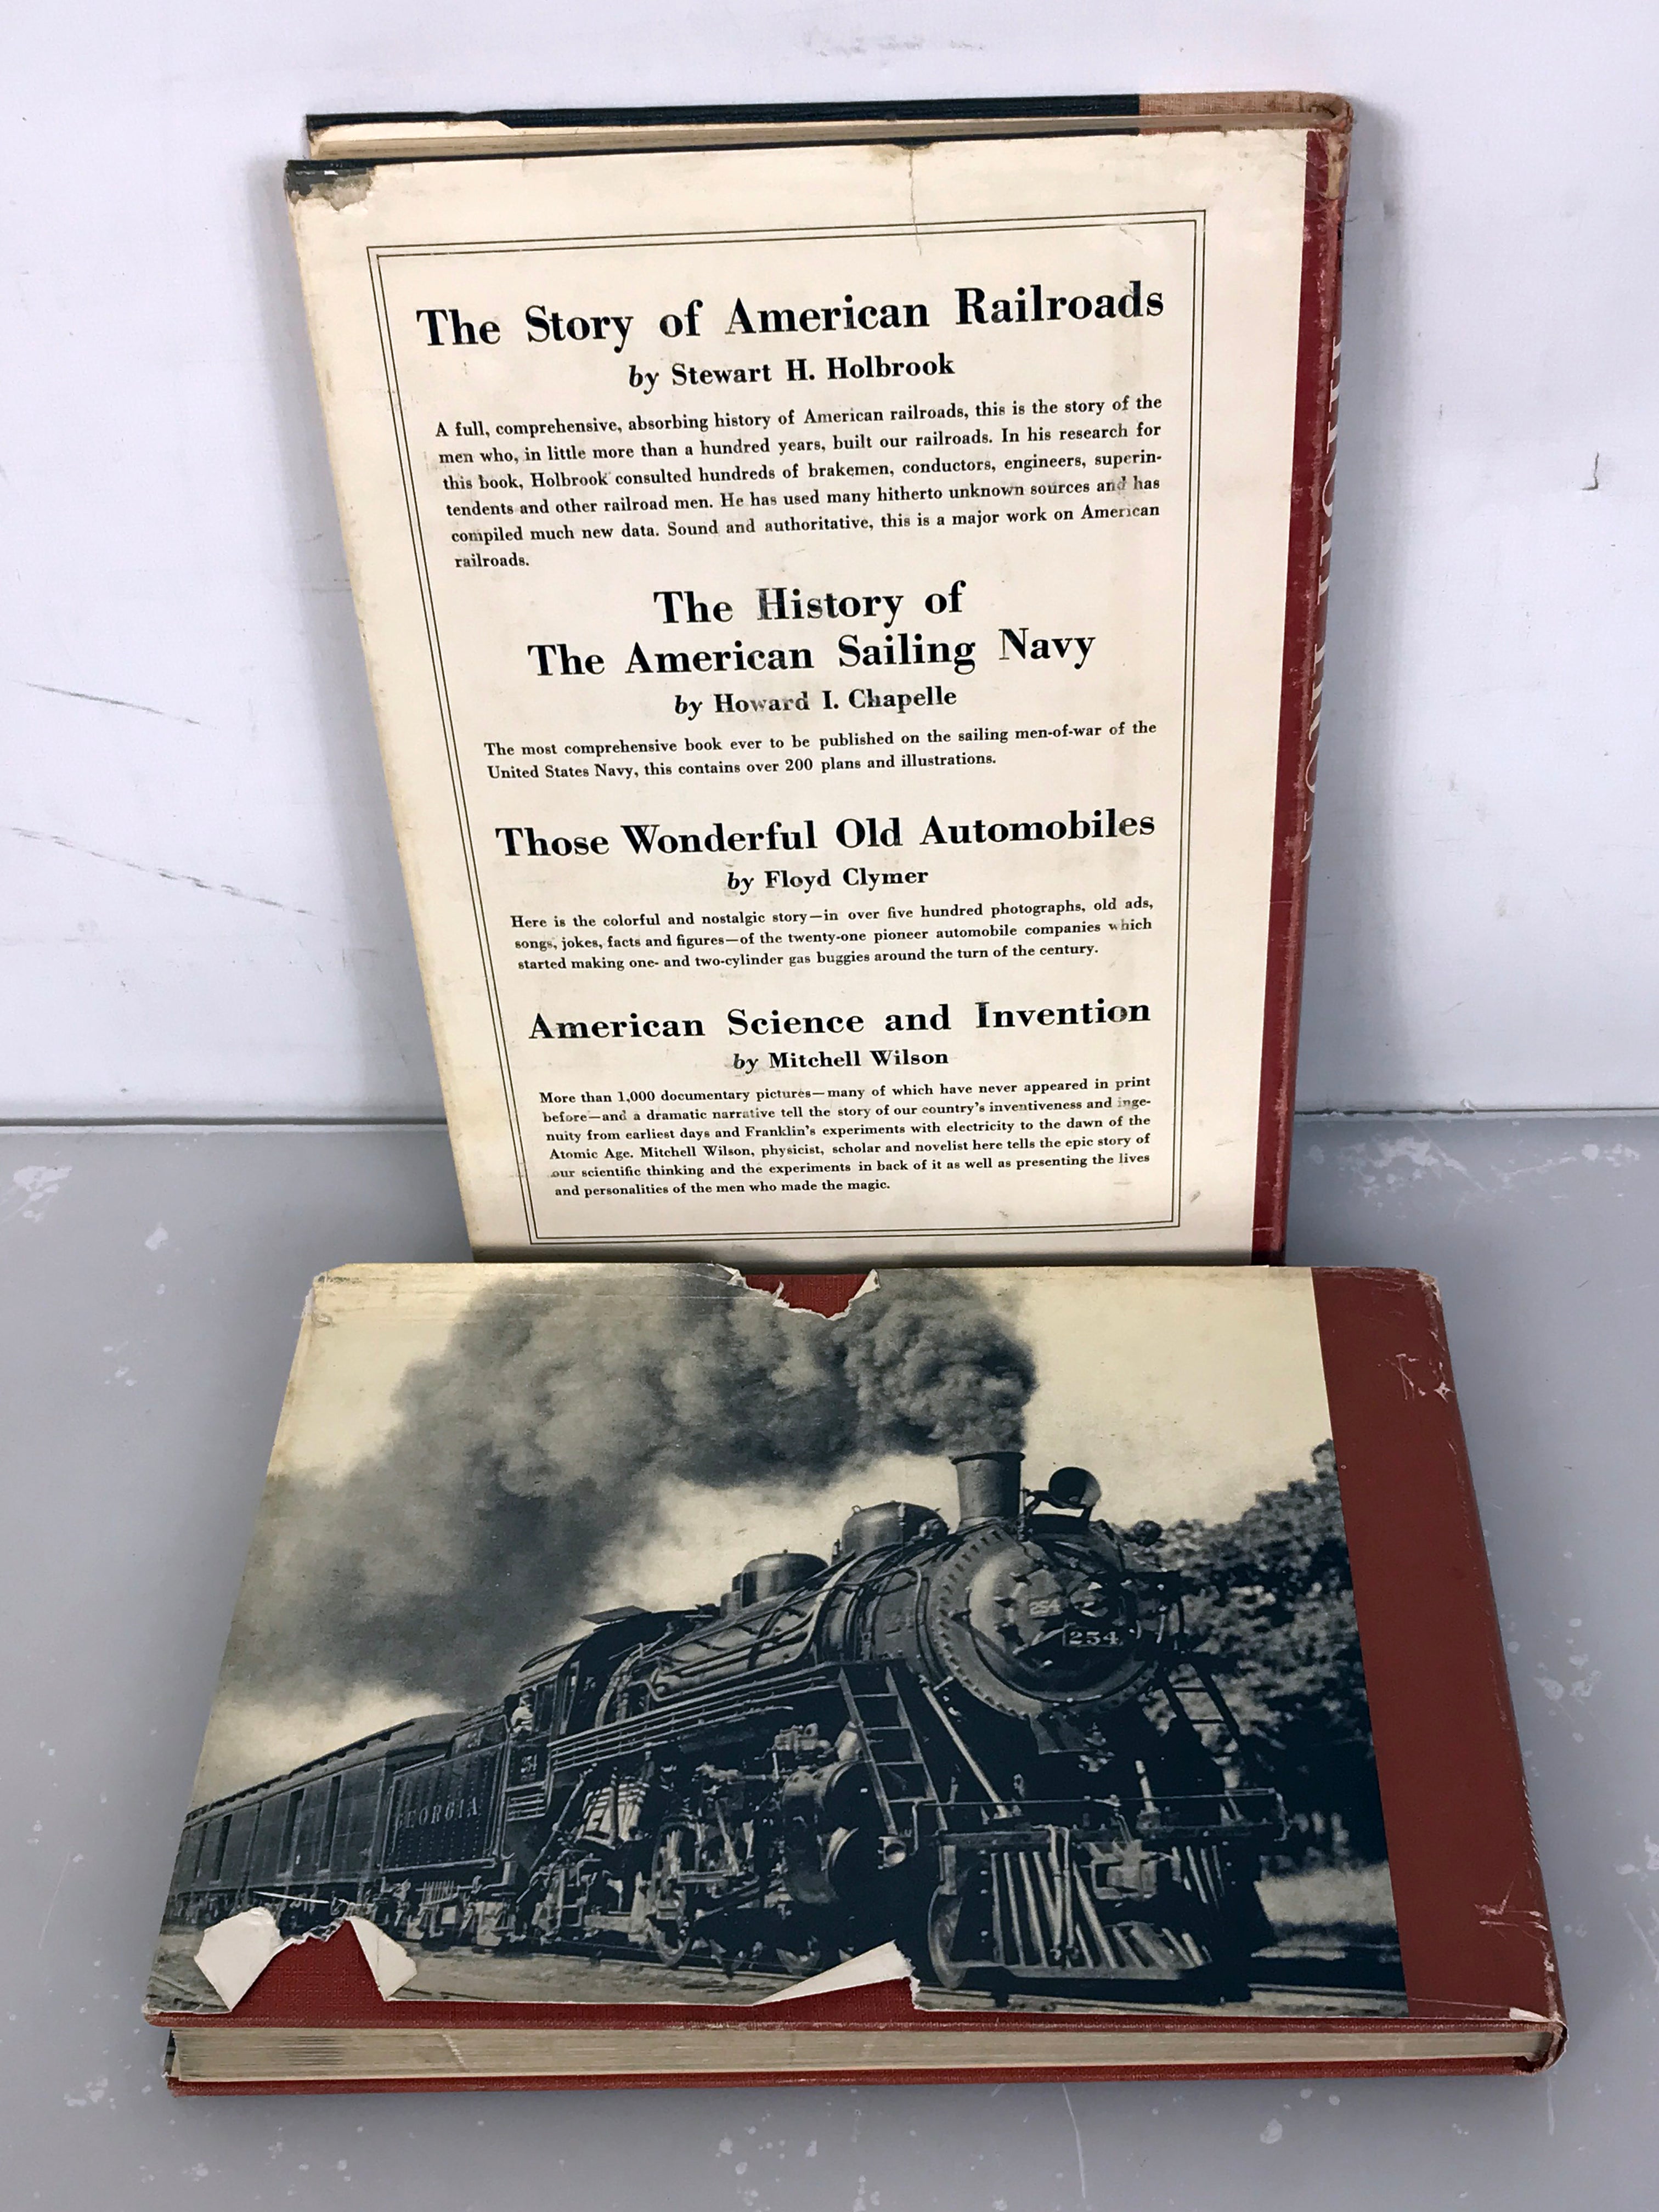 Lot of 2 Lucius Beebe Railroad Books: Highliners A Railroad Album (1940) and High Iron A Book of Trains (1938) HC DJ